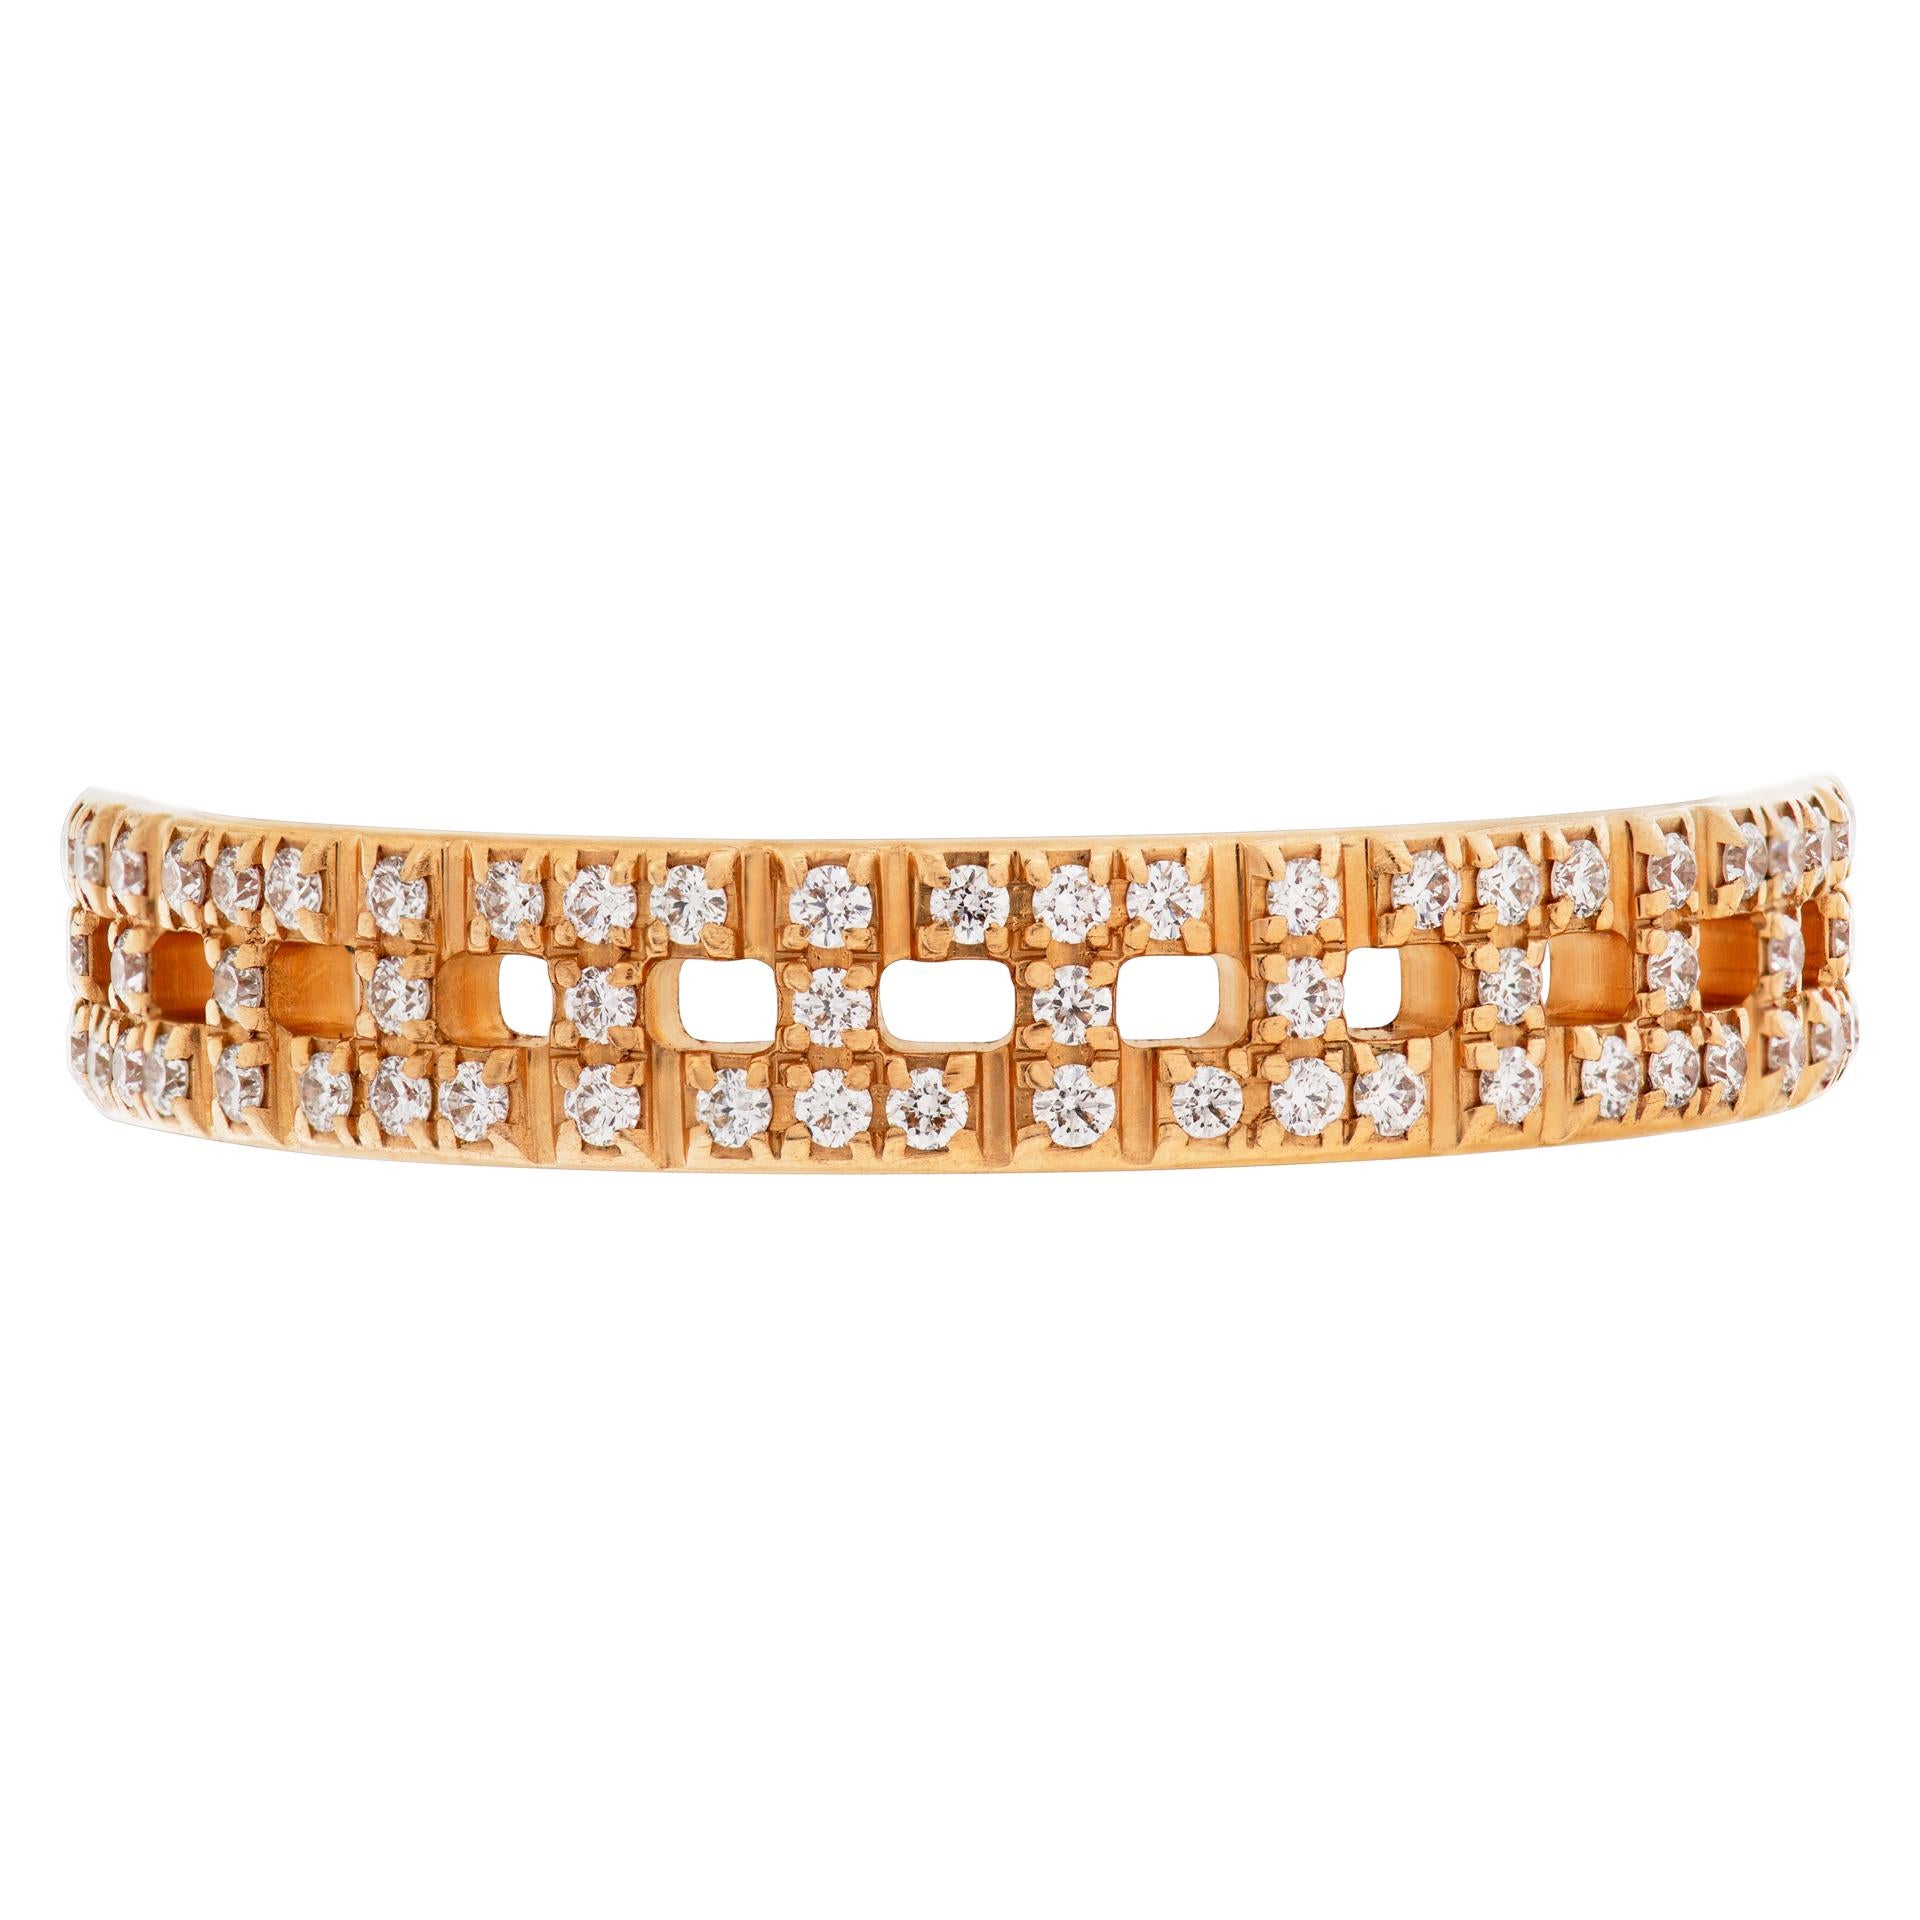 Tiffany & Co. T True Narrow ring part of the Tiffany T collection. 0.23 carats in pave diamonds in 18k rose gold. Ring size 7.<br /><br />This Tiffany & Co. ring is currently size 7 and some items can be sized up or down, please ask! It weighs 1.9